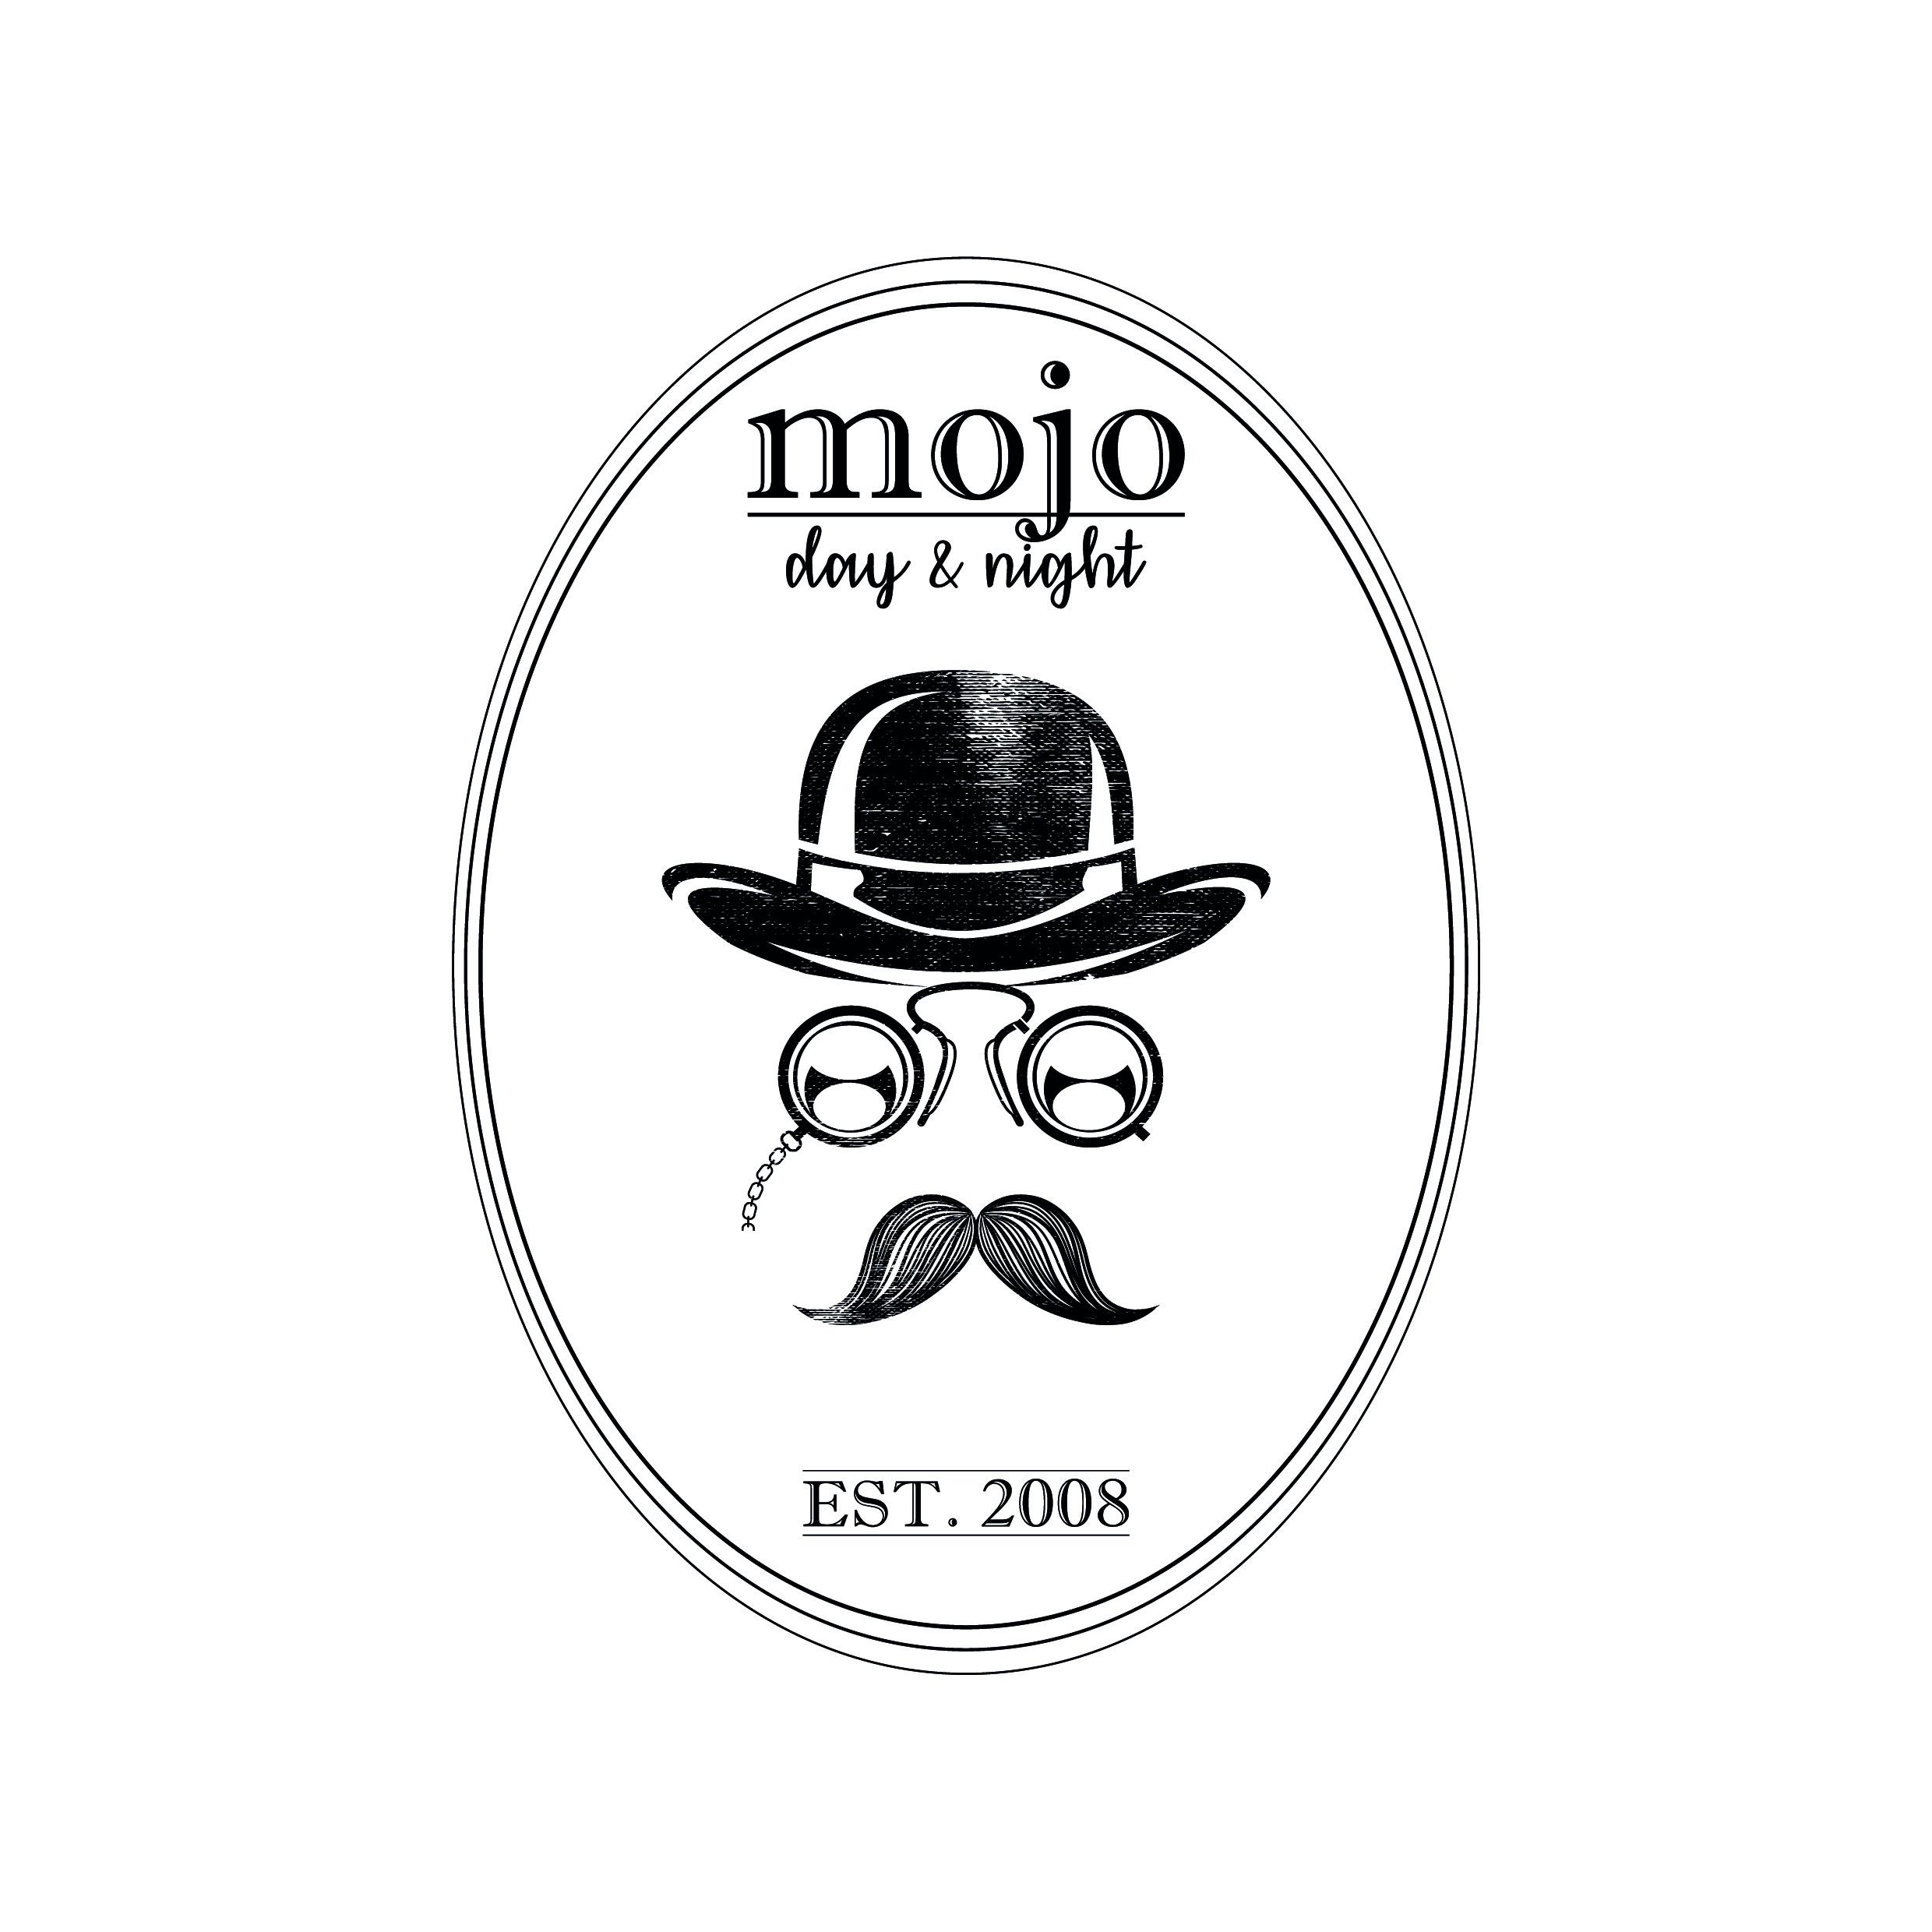 Mojo day & night | Cafe - Bar in Offenbach